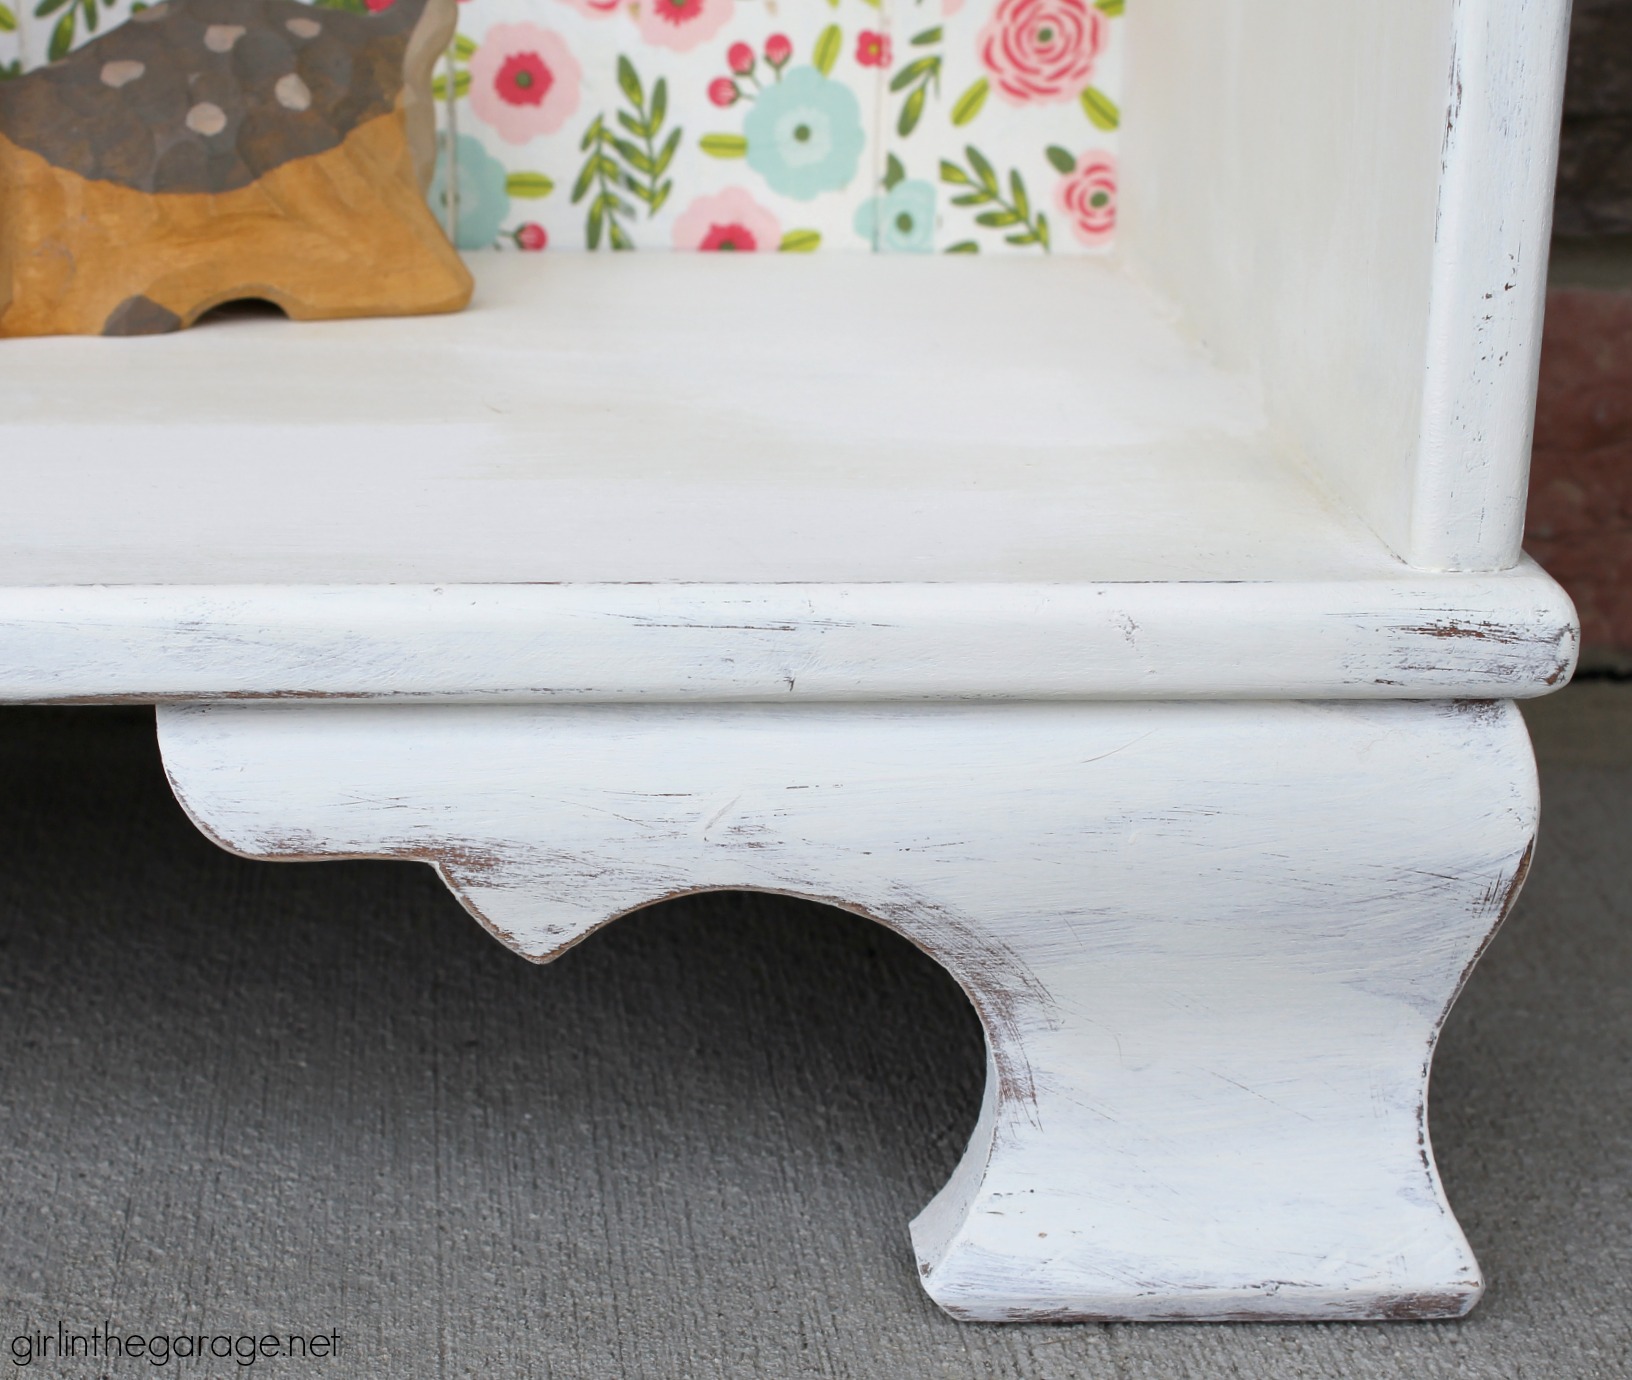 Vintage decoupage bookcase makeover with Chalk Paint, Mod Podge, and napkins - DIY tutorial by Girl in the Garage